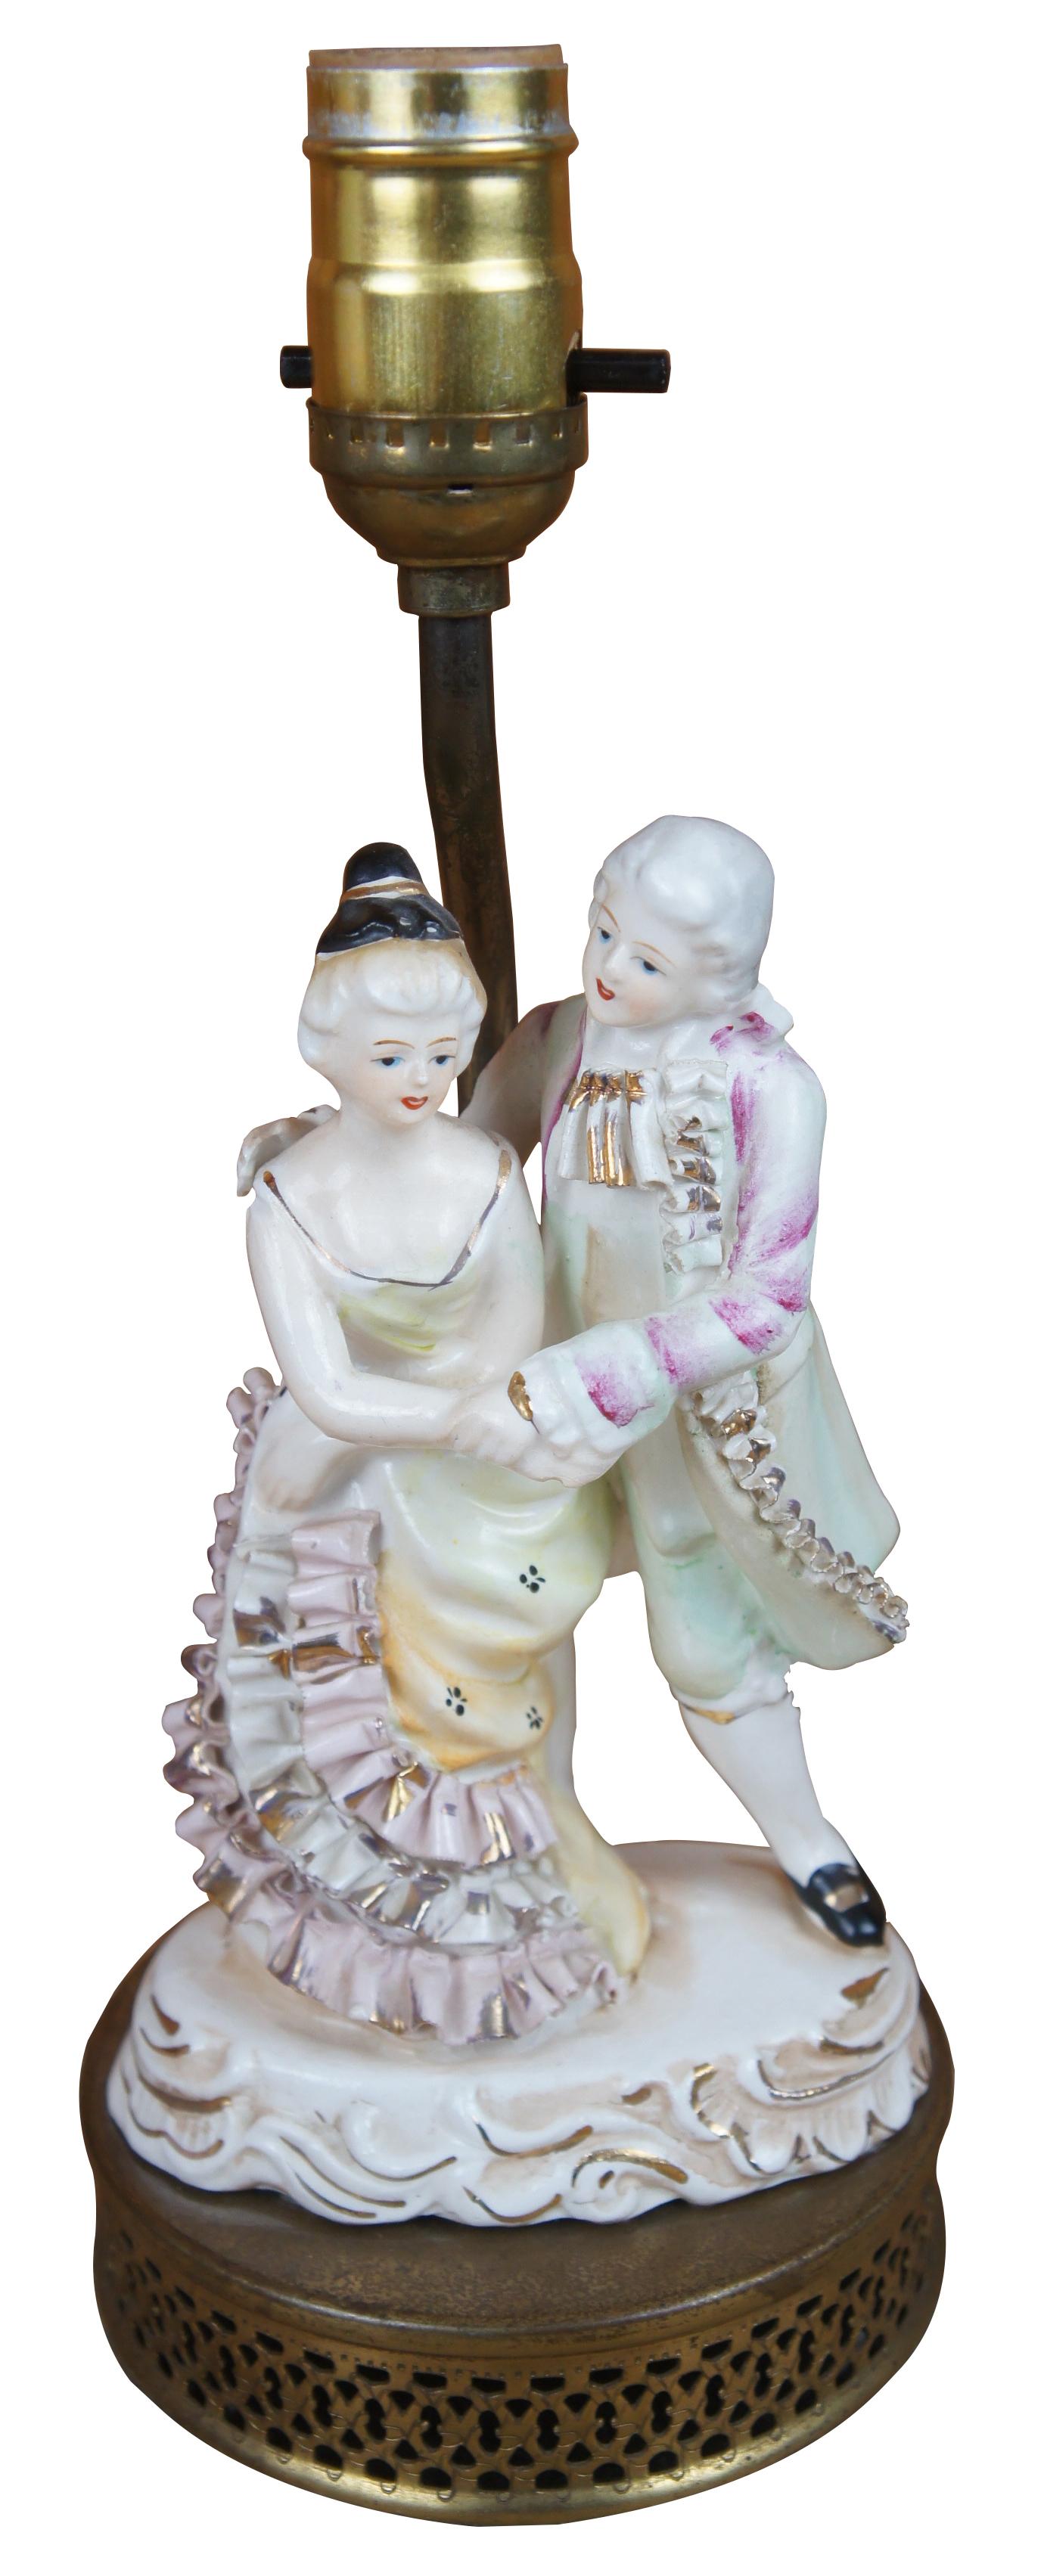 2 Mid-century reticulated brass and figural porcelain lamps featuring a pair of couples dressed in baroque or colonial attire dancing the waltz under cream shades.

Measures: 10